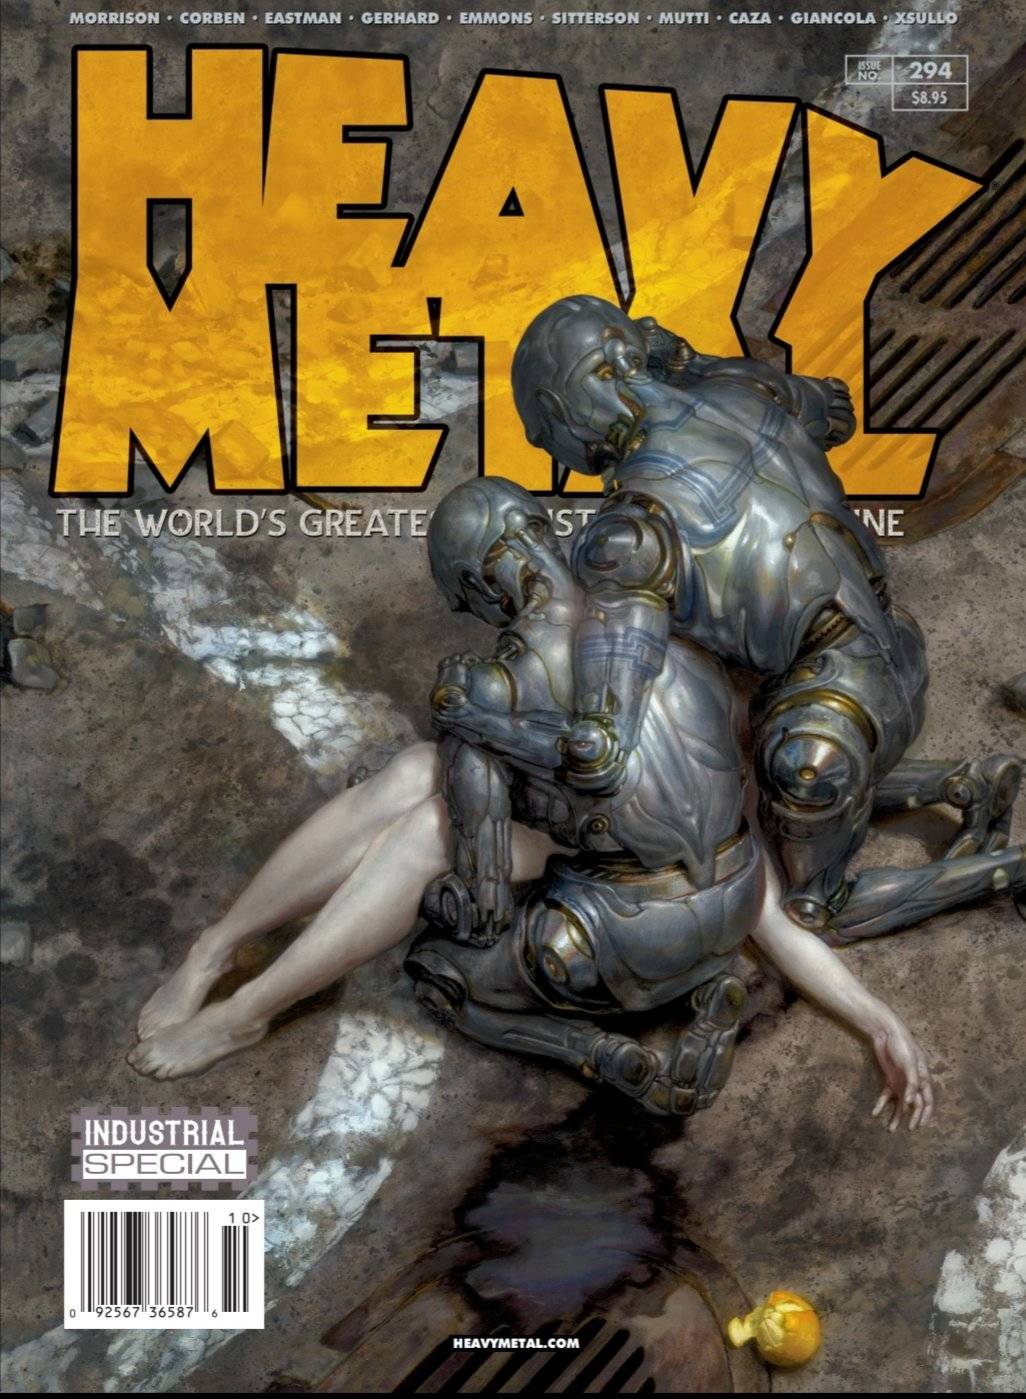 Heavy Metal #294 Cover A Giancola (Mature)